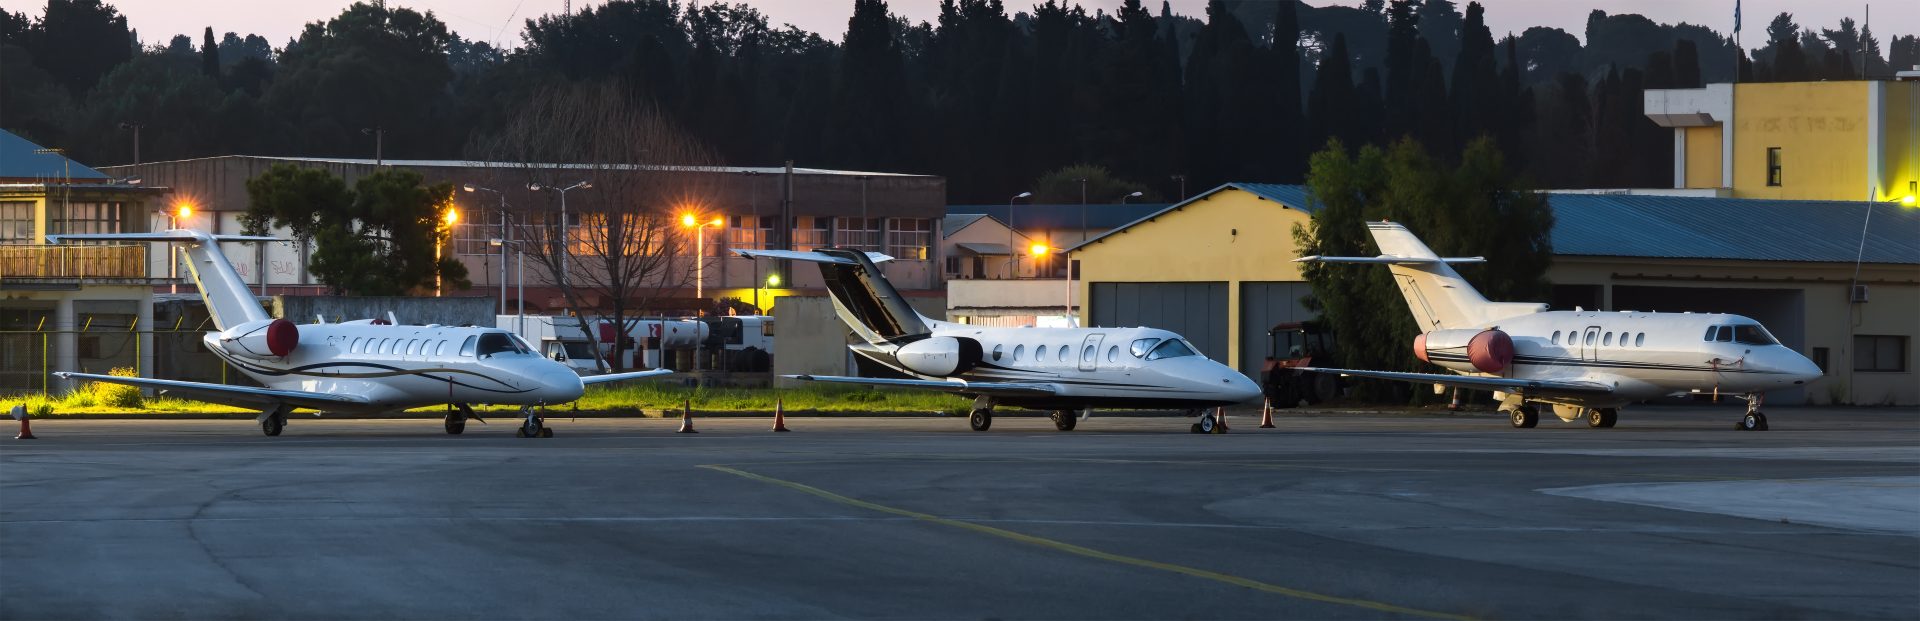 Private Jets On Stand